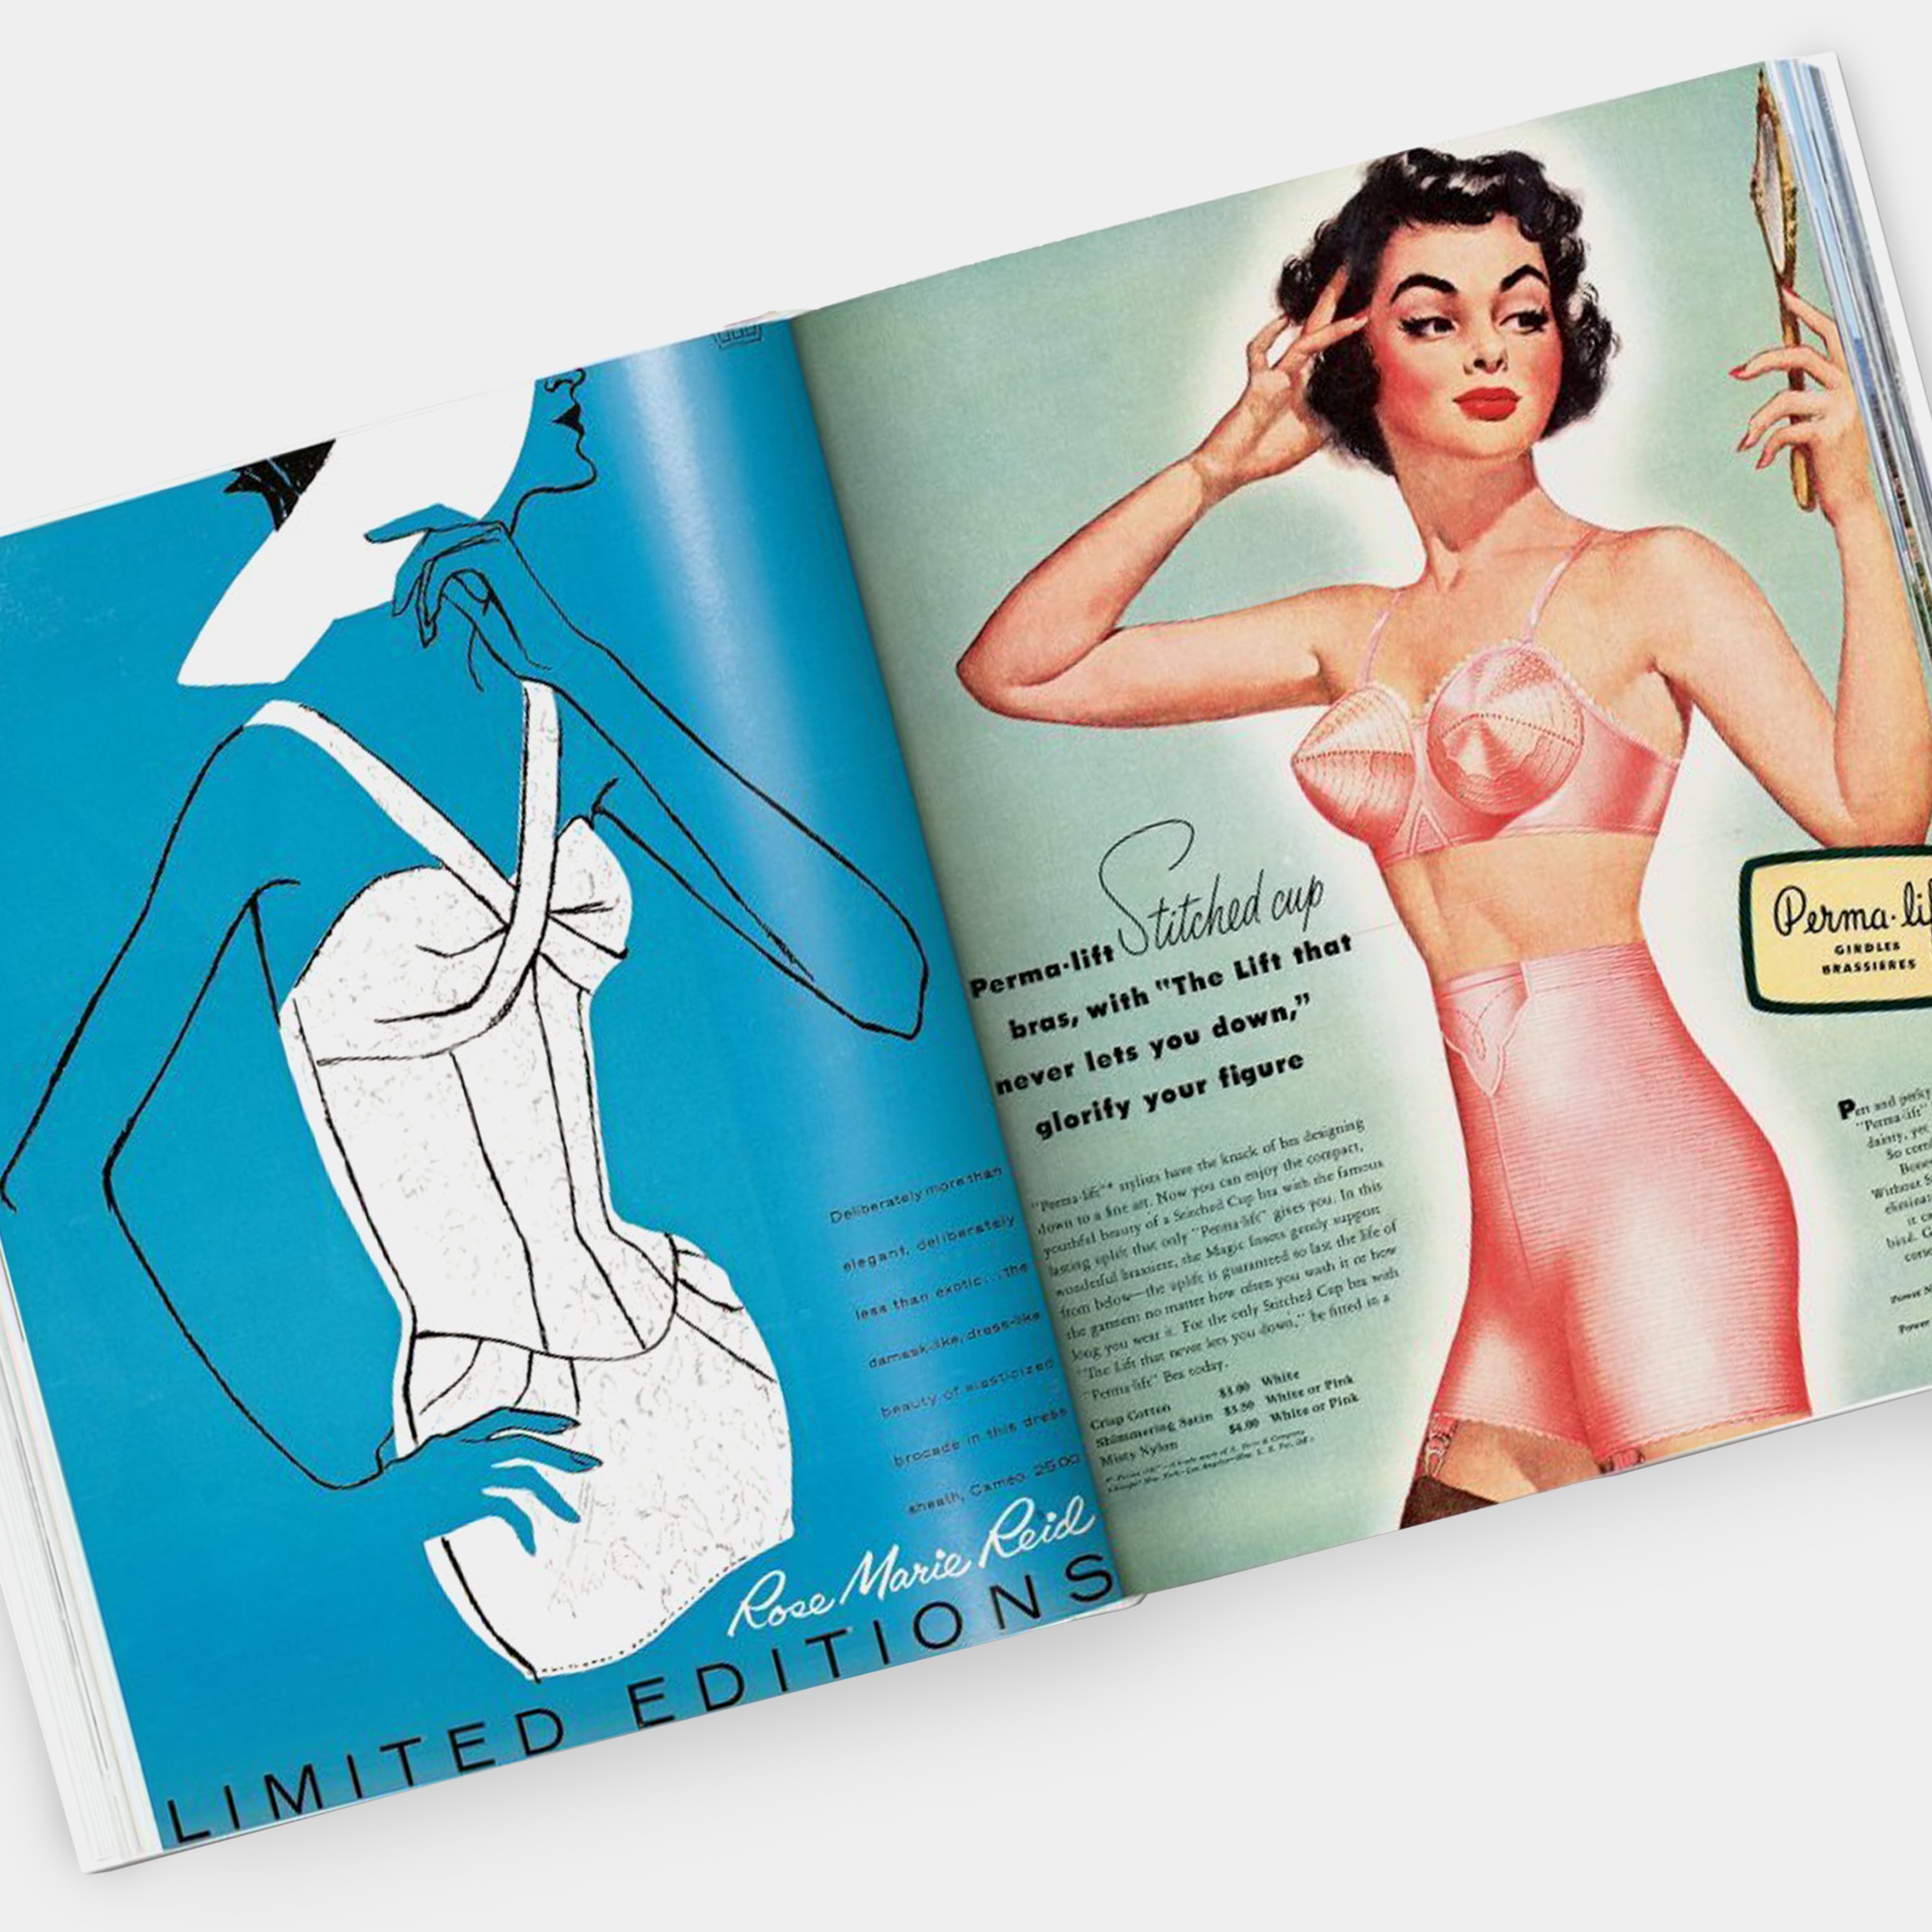 All-American Ads of the 50s Taschen Book